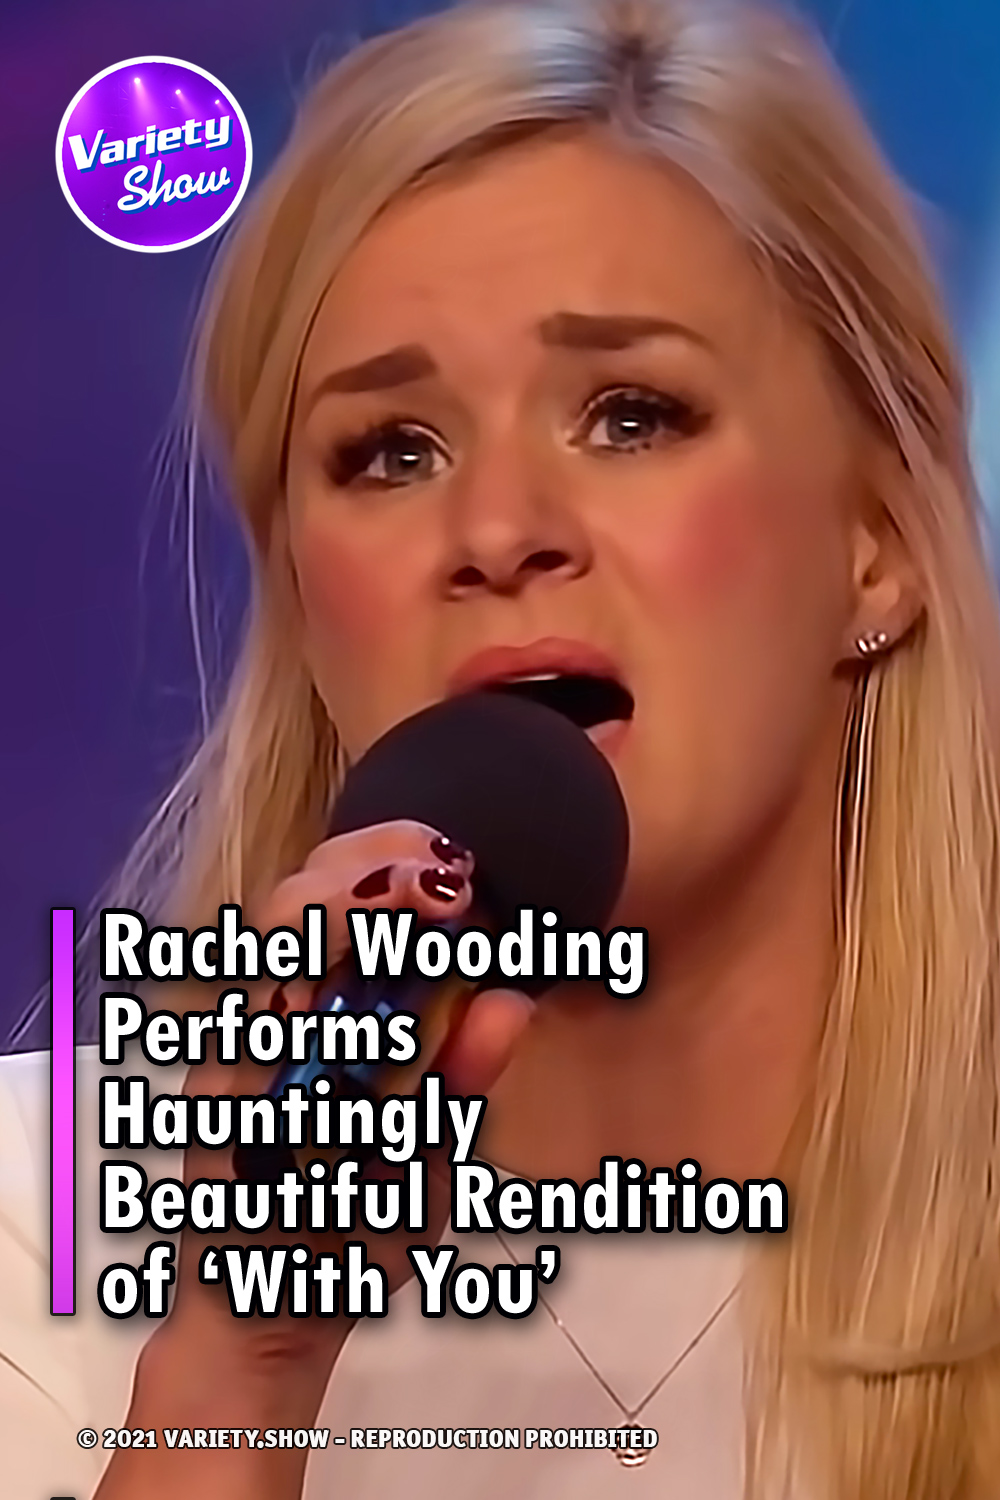 Rachel Wooding Performs Hauntingly Beautiful Rendition of ‘With You’